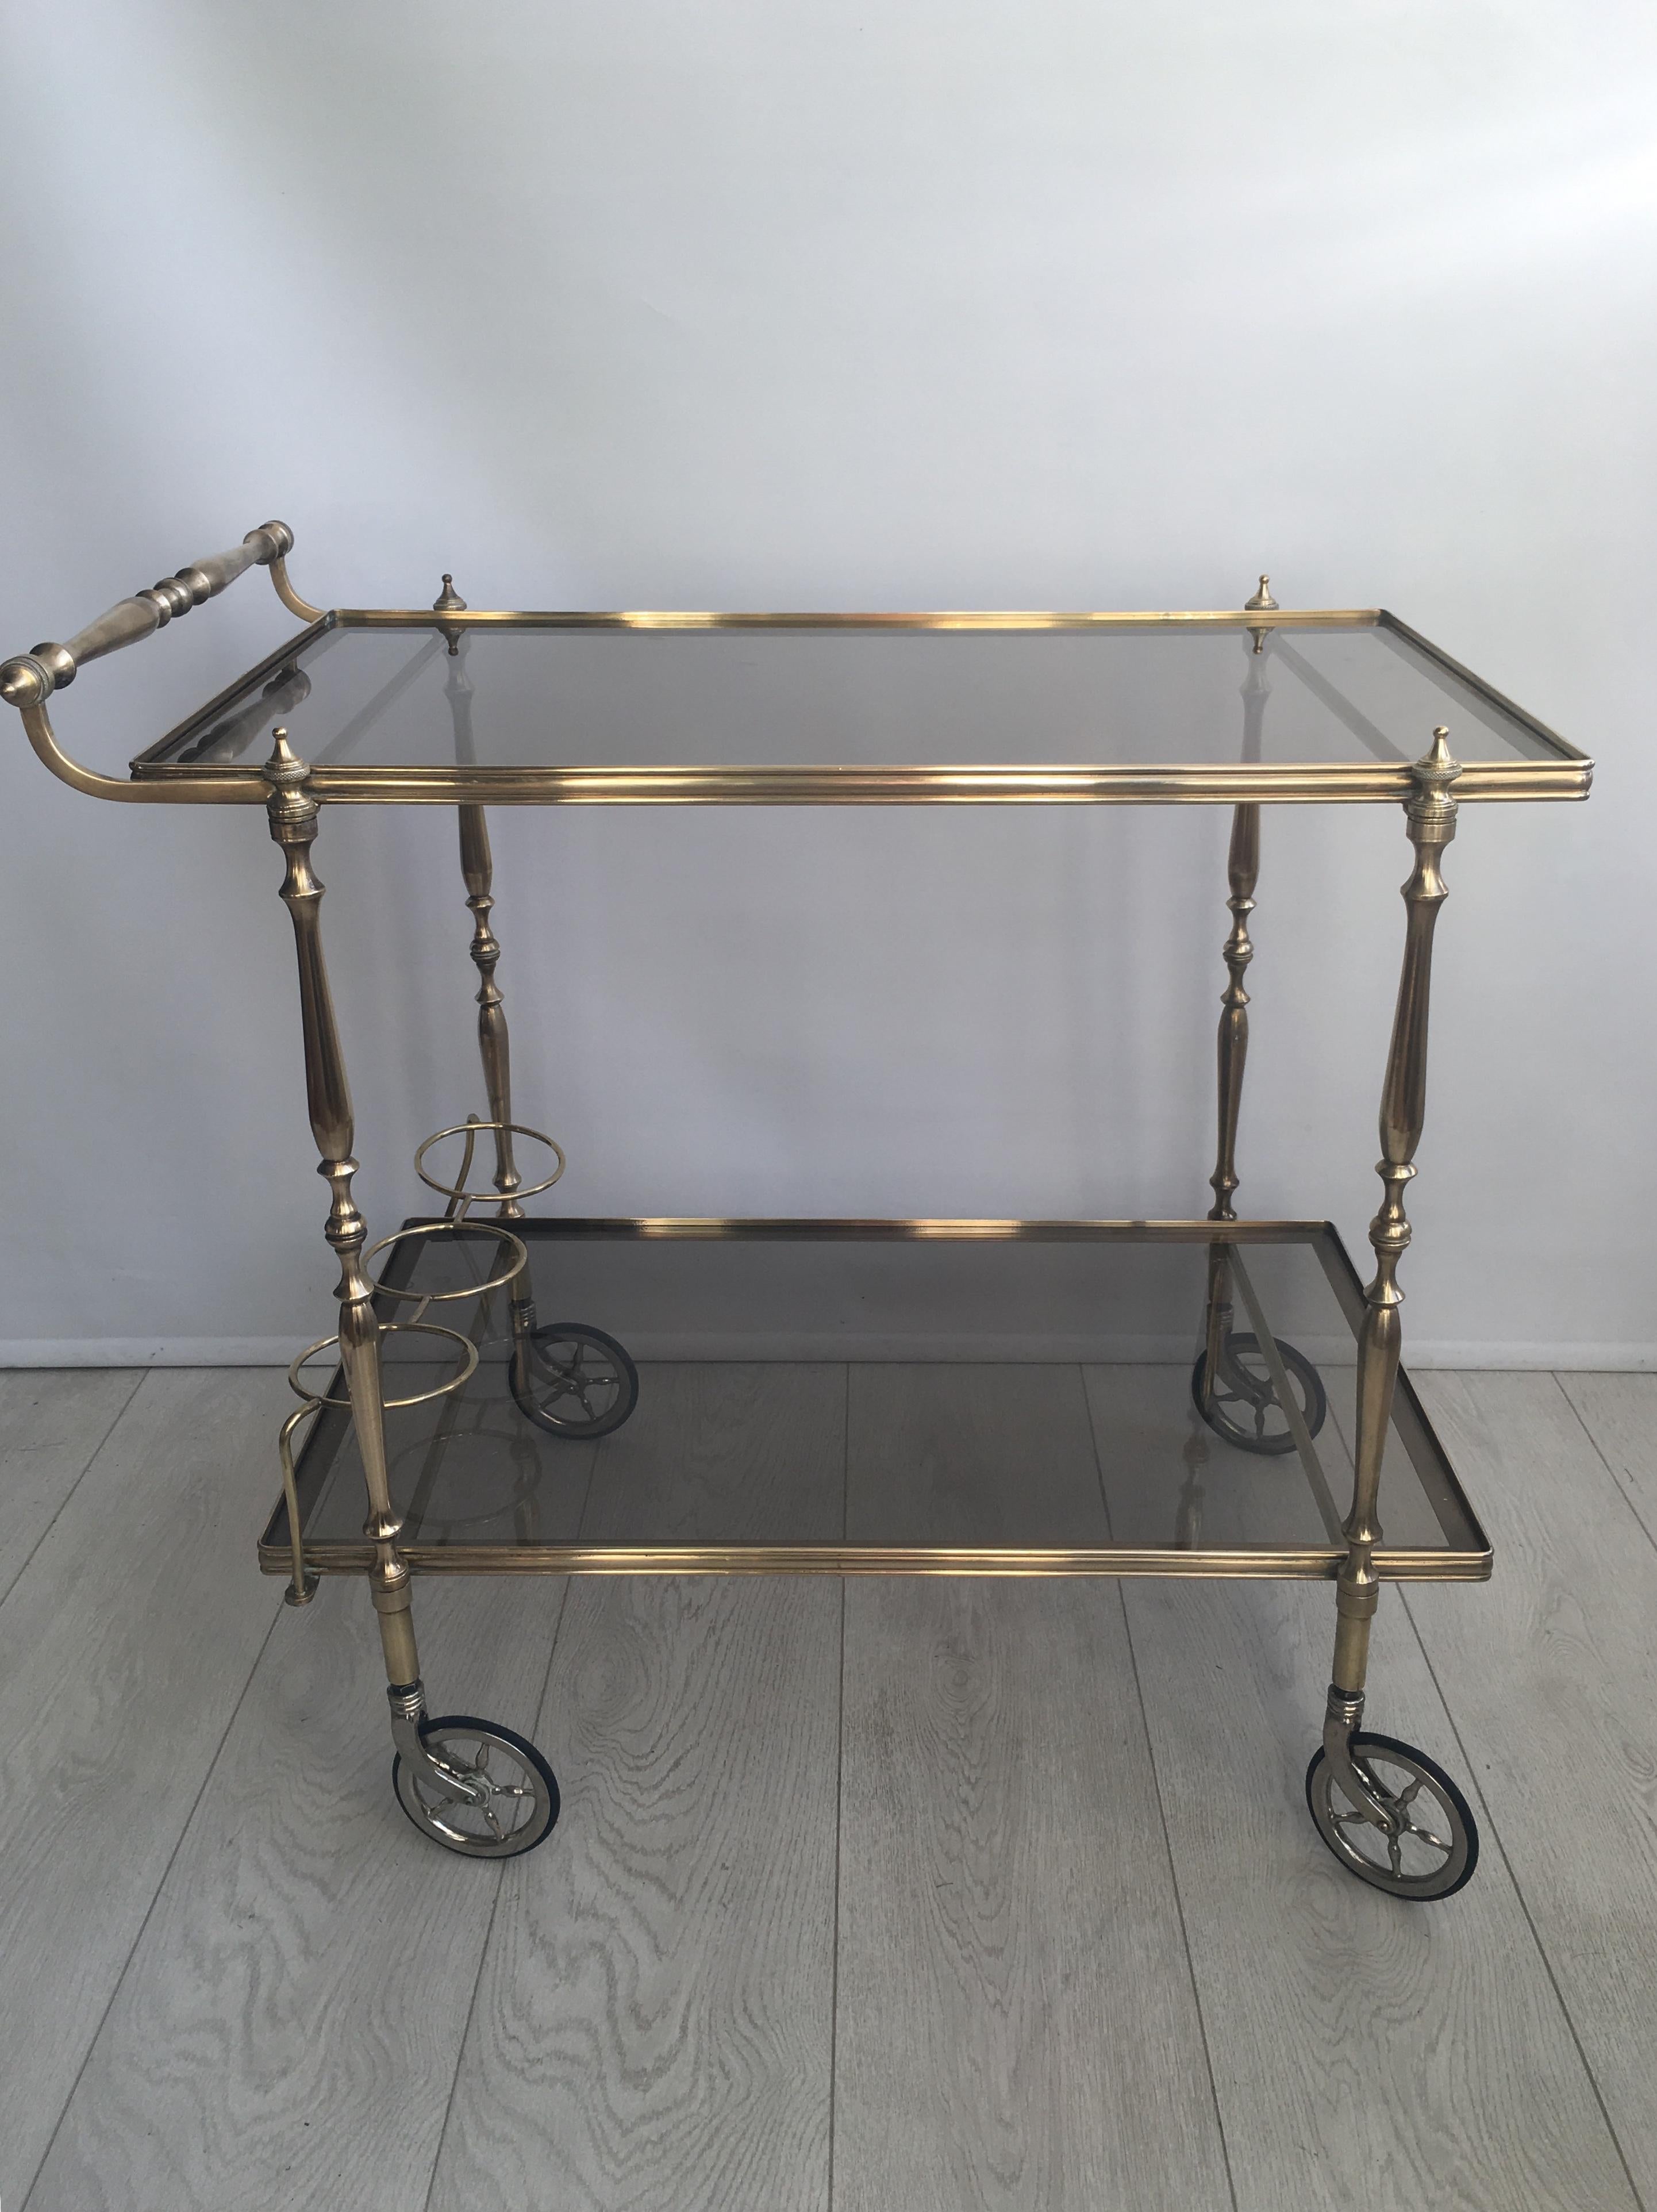 Great looking vintage drinks trolley from France, circa 1950

Some lovely detailing to the polished brass frame

Tinted glass shelves 

Top tray measures 68cm wide by 40cm deep and stands 63.5cm to glass
Overall dims 73.5cm wide, 44cm deep